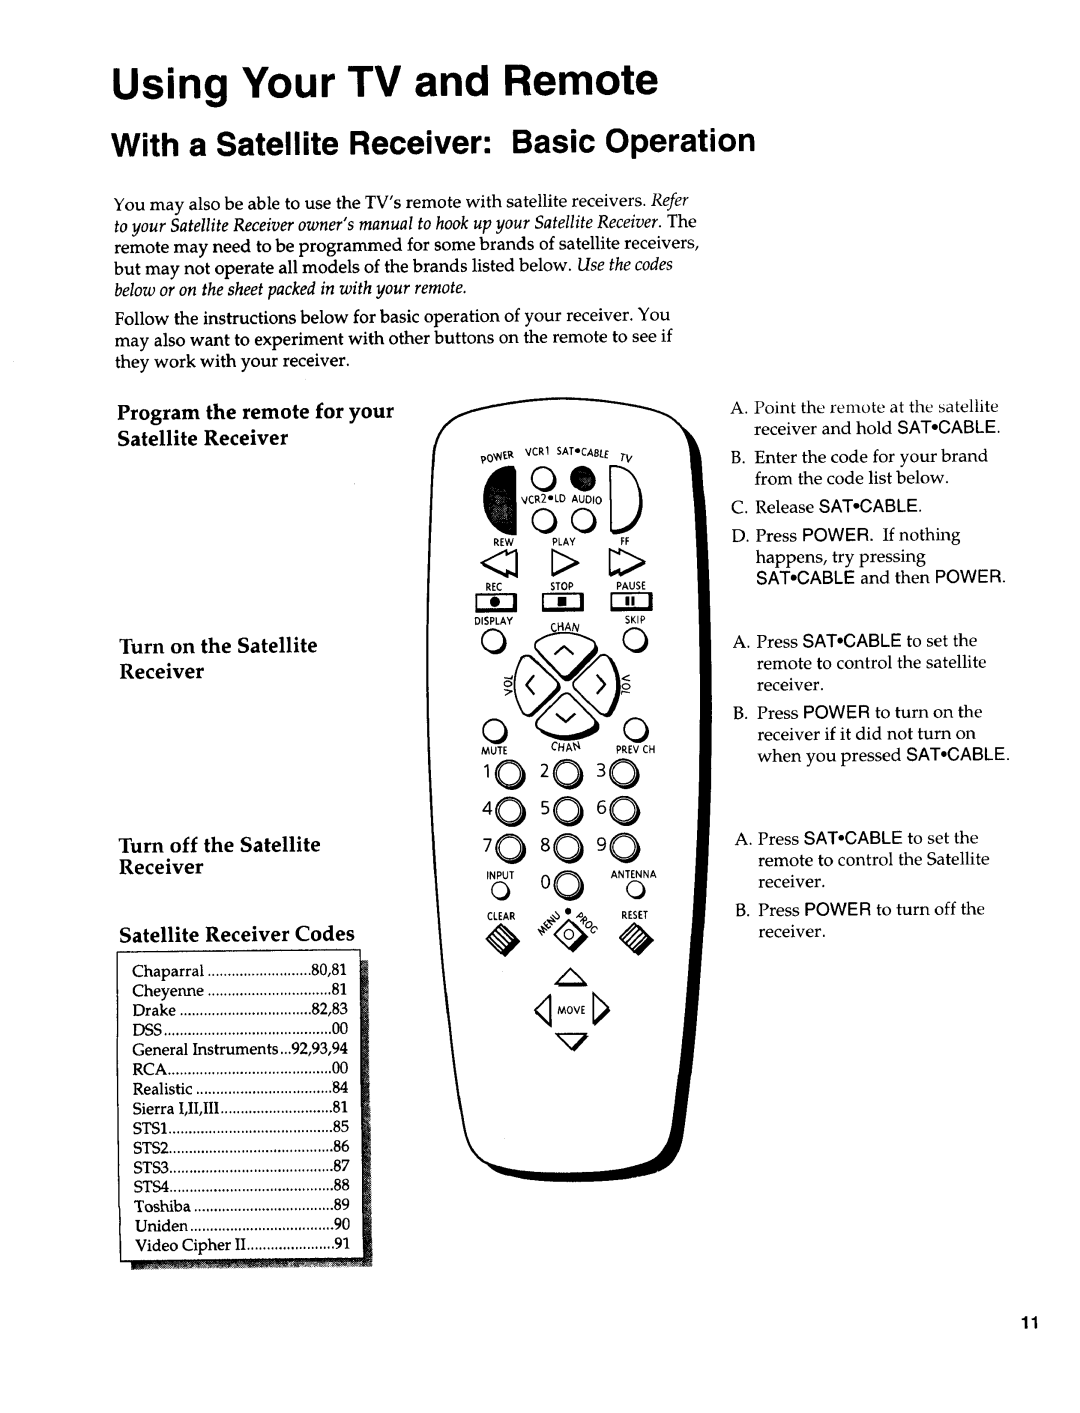 Sears 274.4372859 With a Satellite Receiver Basic Operation, Program the remote for your Satellite Receiver, Turn off 